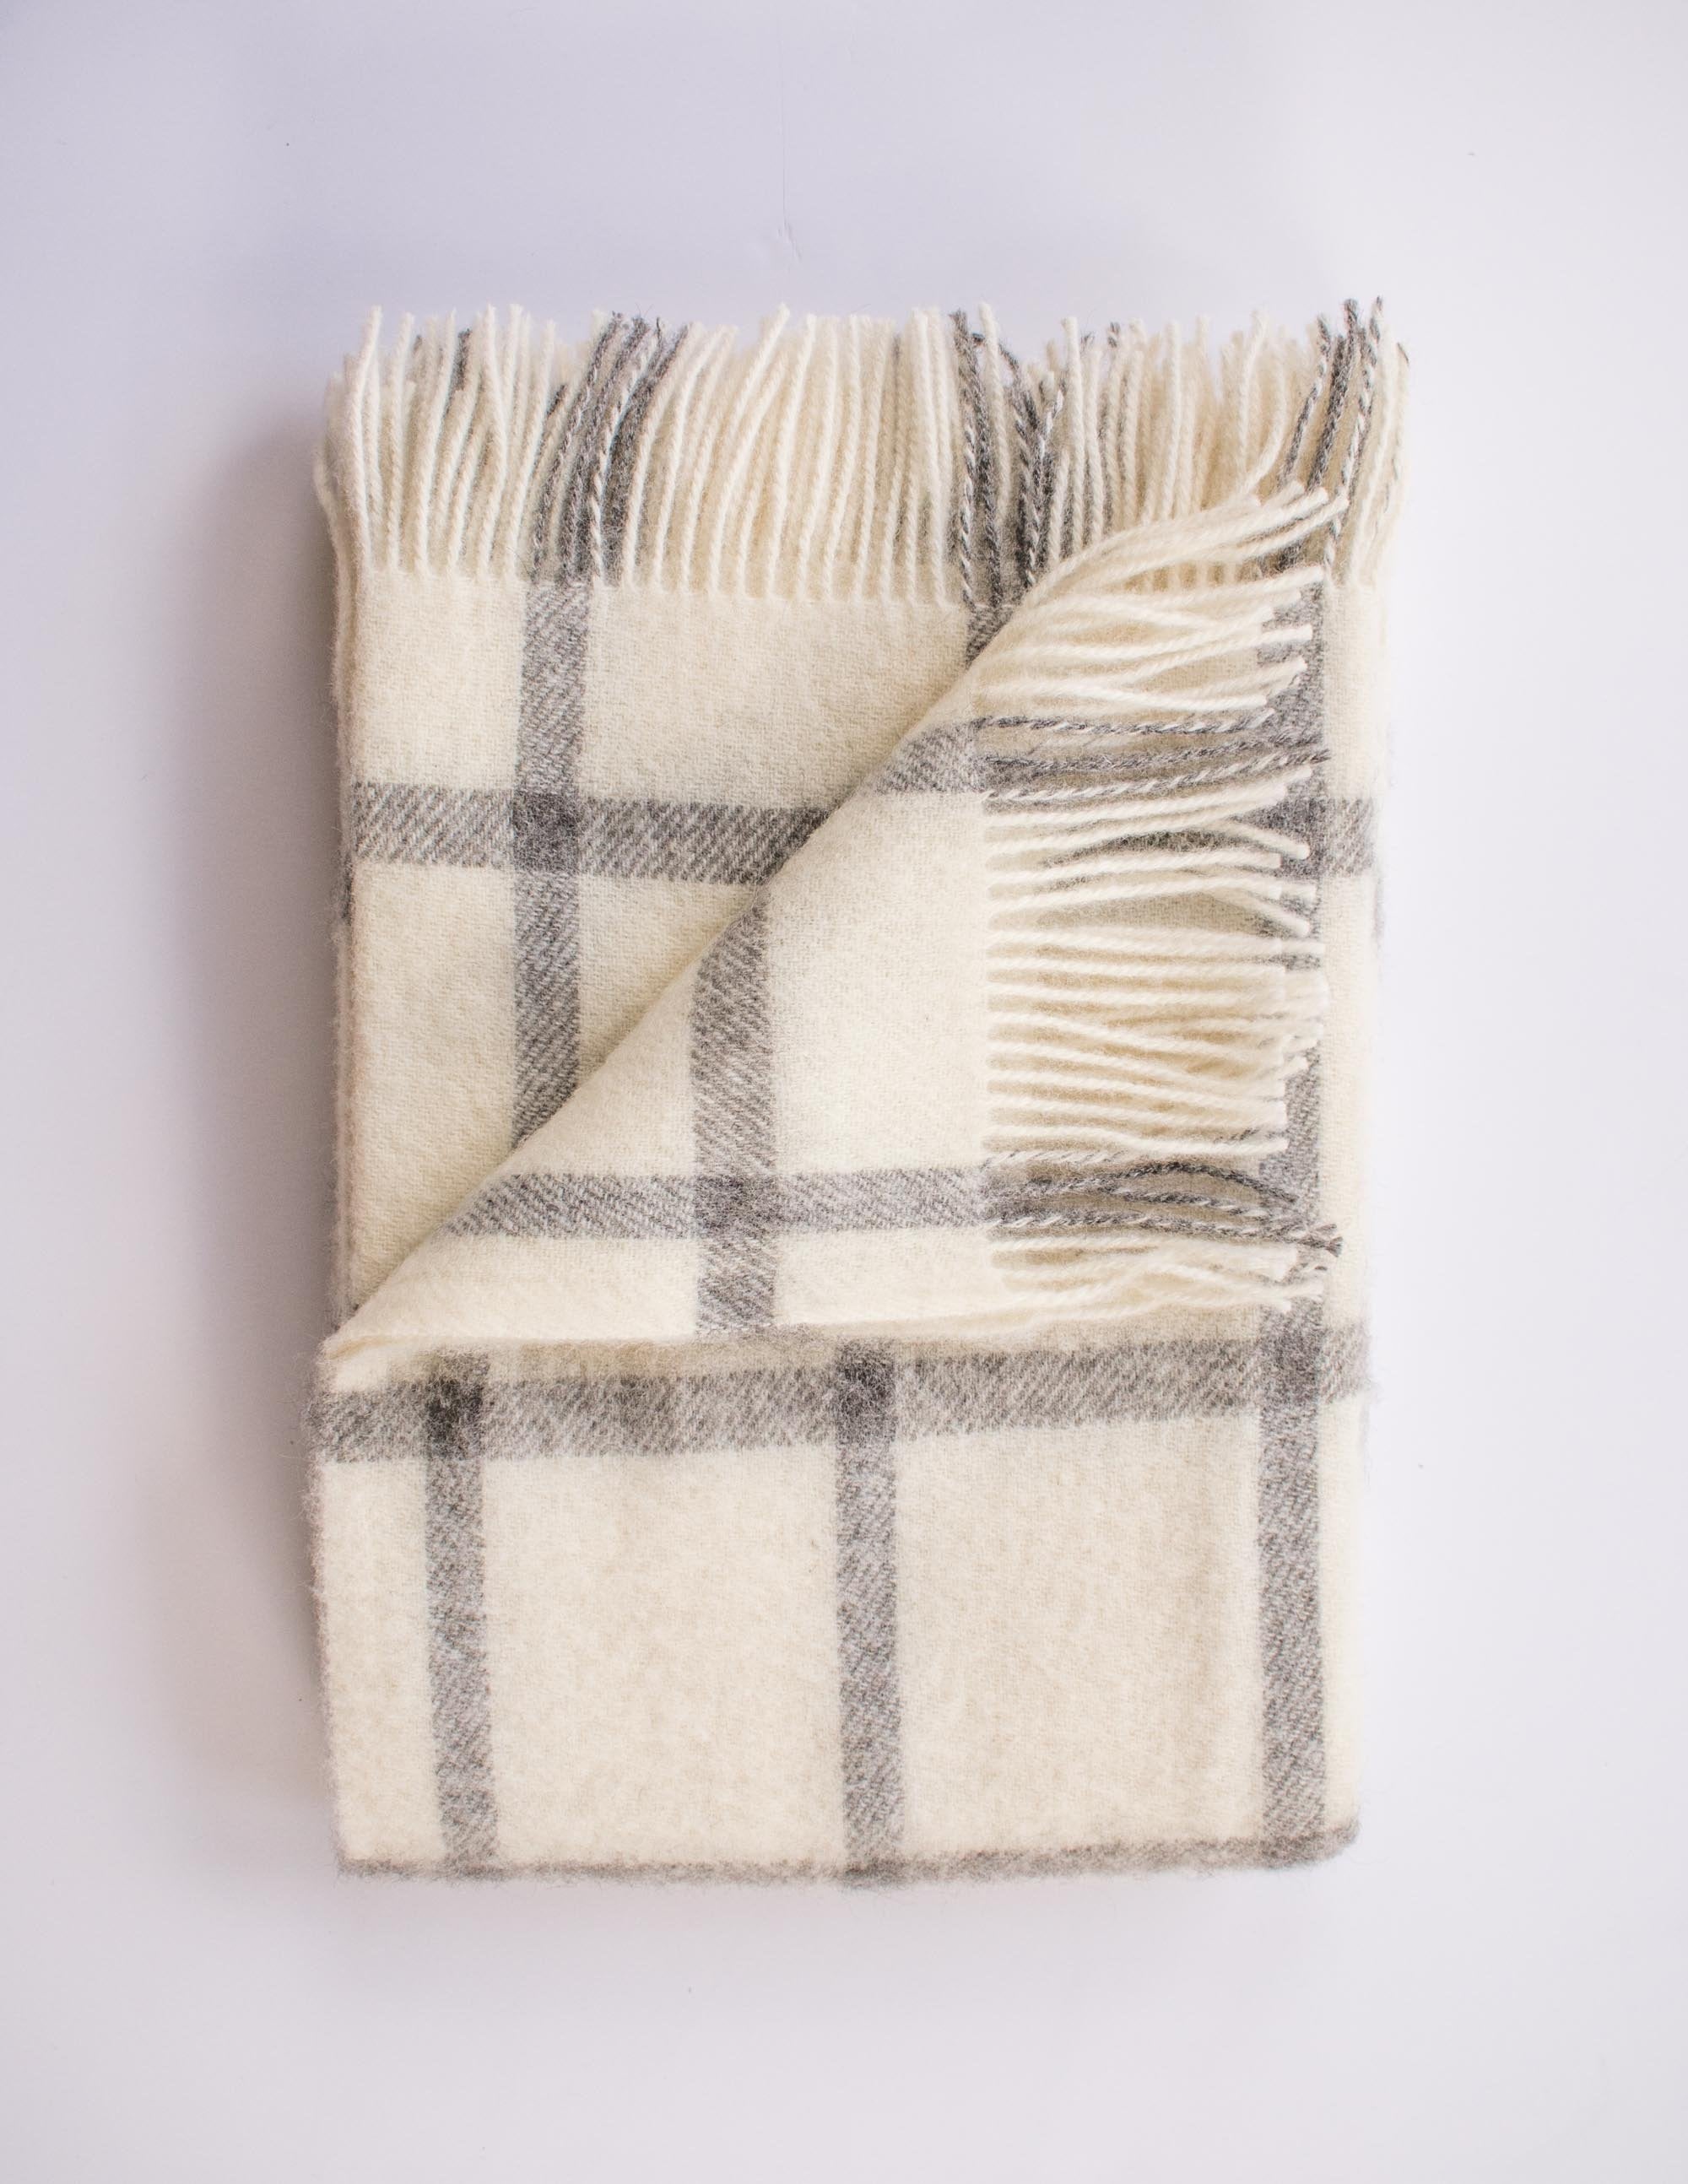 Soft white and grey checker patterned merino throw blanket